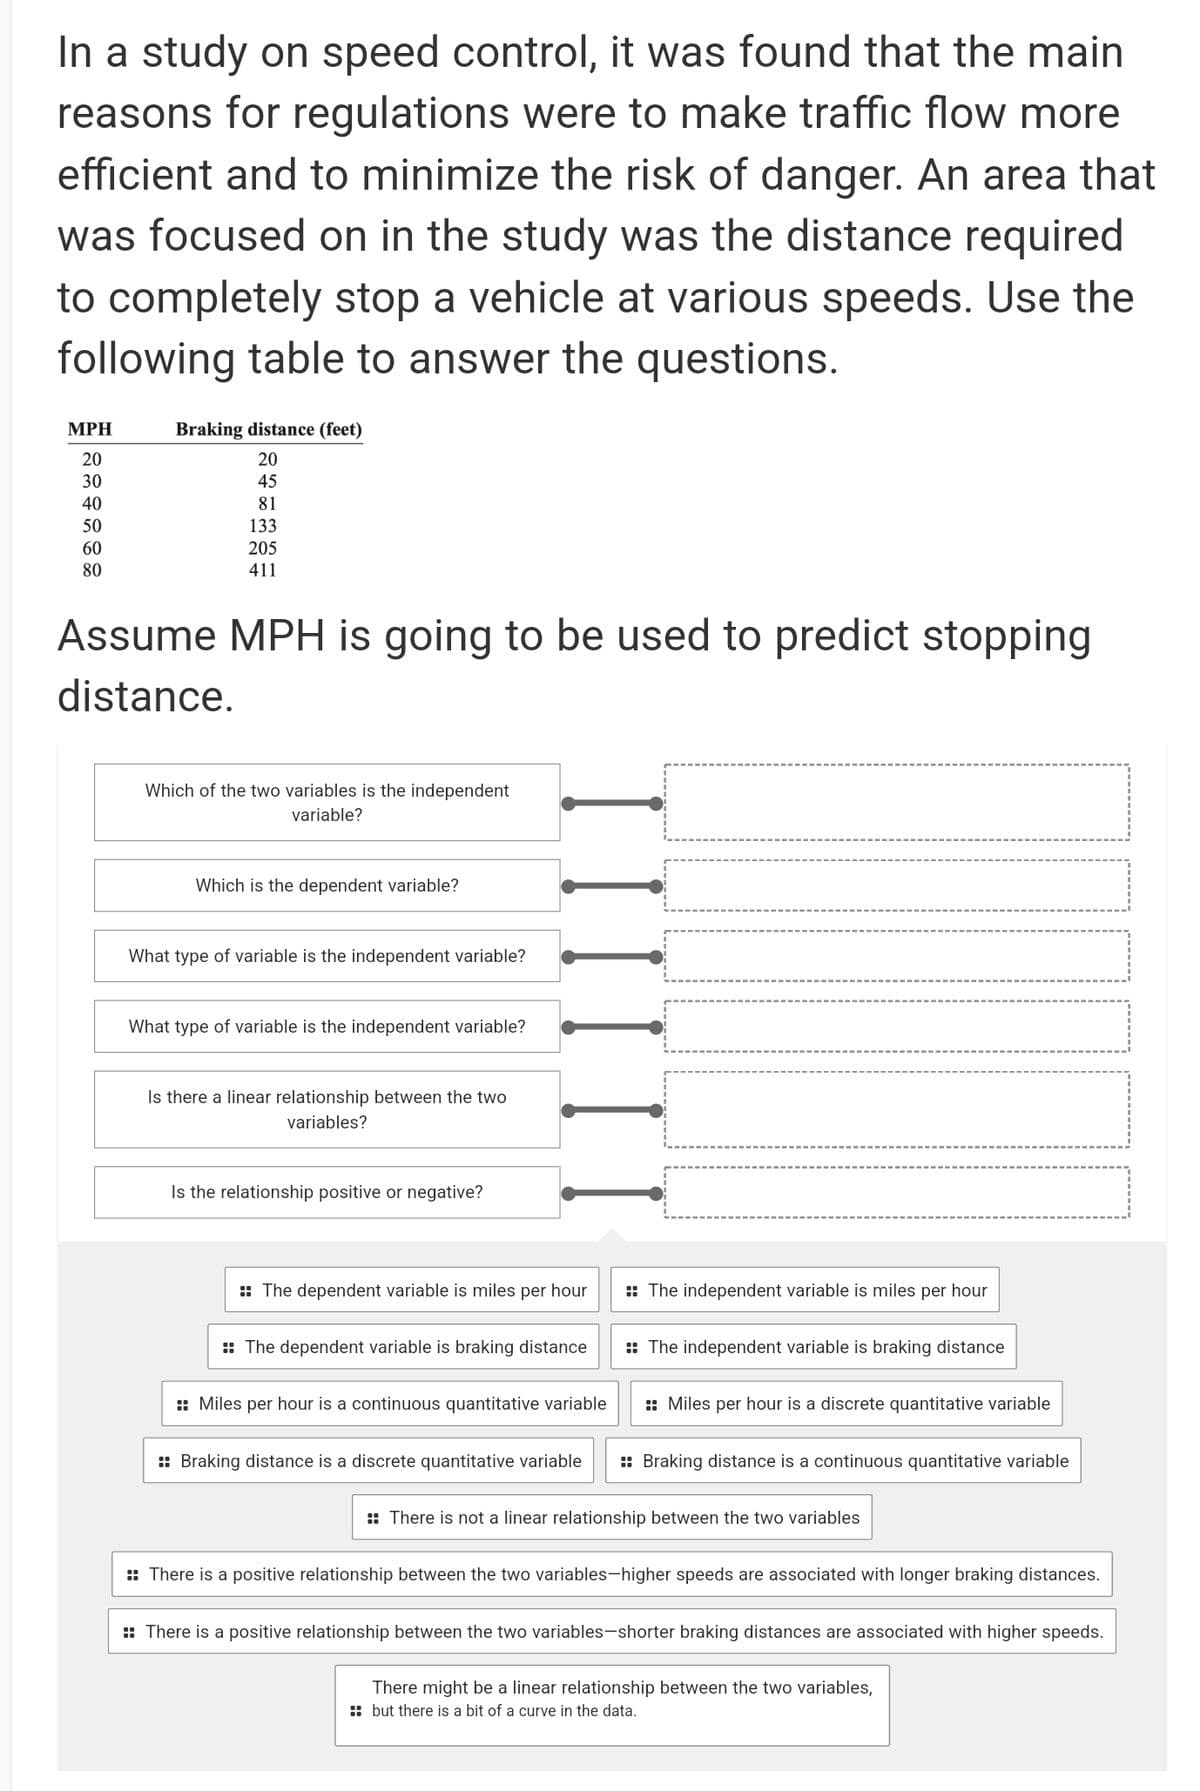 In a study on speed control, it was found that the main
reasons for regulations were to make traffic flow more
efficient and to minimize the risk of danger. An area that
was focused on in the study was the distance required
to completely stop a vehicle at various speeds. Use the
following table to answer the questions.
МPH
Braking distance (feet)
20
20
30
45
40
81
50
133
60
205
80
411
Assume MPH is going to be used to predict stopping
distance.
Which of the two variables is the independent
variable?
Which is the dependent variable?
What type of variable is the independent variable?
What type of variable is the independent variable?
Is there a linear relationship between the two
variables?
Is the relationship positive or negative?
:: The dependent variable is miles per hour
:: The independent variable is miles per hour
: The dependent variable is braking distance
: The independent variable is braking distance
:: Miles per hour is a continuous quantitative variable
:: Miles per hour is a discrete quantitative variable
:: Braking distance is a discrete quantitative variable
:: Braking distance is a continuous quantitative variable
:: There is not a linear relationship between the two variables
: There is a positive relationship between the two variables-higher speeds are associated with longer braking distances.
:: There is a positive relationship between the two variables-shorter braking distances are associated with higher speeds.
There might be a linear relationship between the two variables,
:: but there is a bit of a curve in the data.
